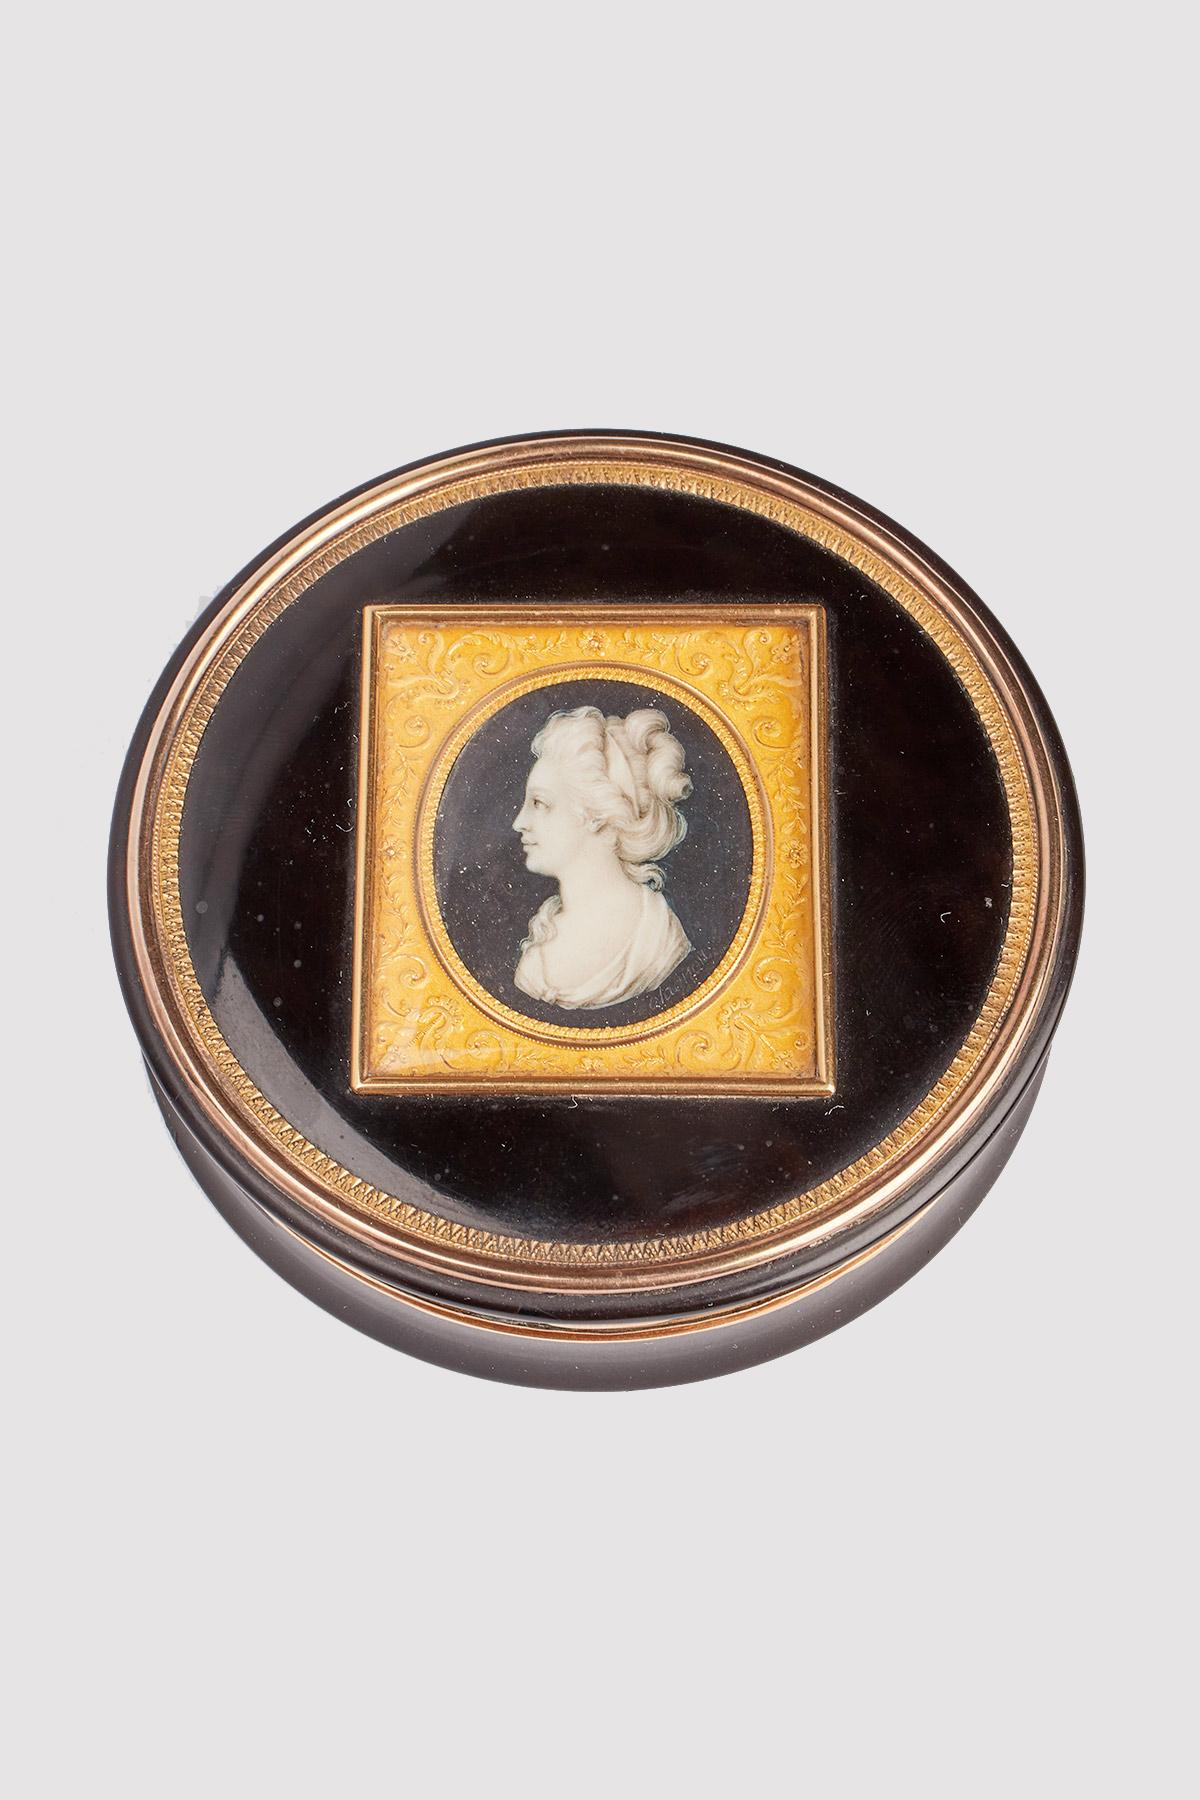 18 K gold and tortoiseshell snuffbox with oval miniature painted on ivory, depicting a woman bust in a square gold frame. Maker marks: Pierre Andrè Montauban. Miniaturist: Pierre Victor Olagnon. France early 19th century. (SHIP TO EU ONLY)